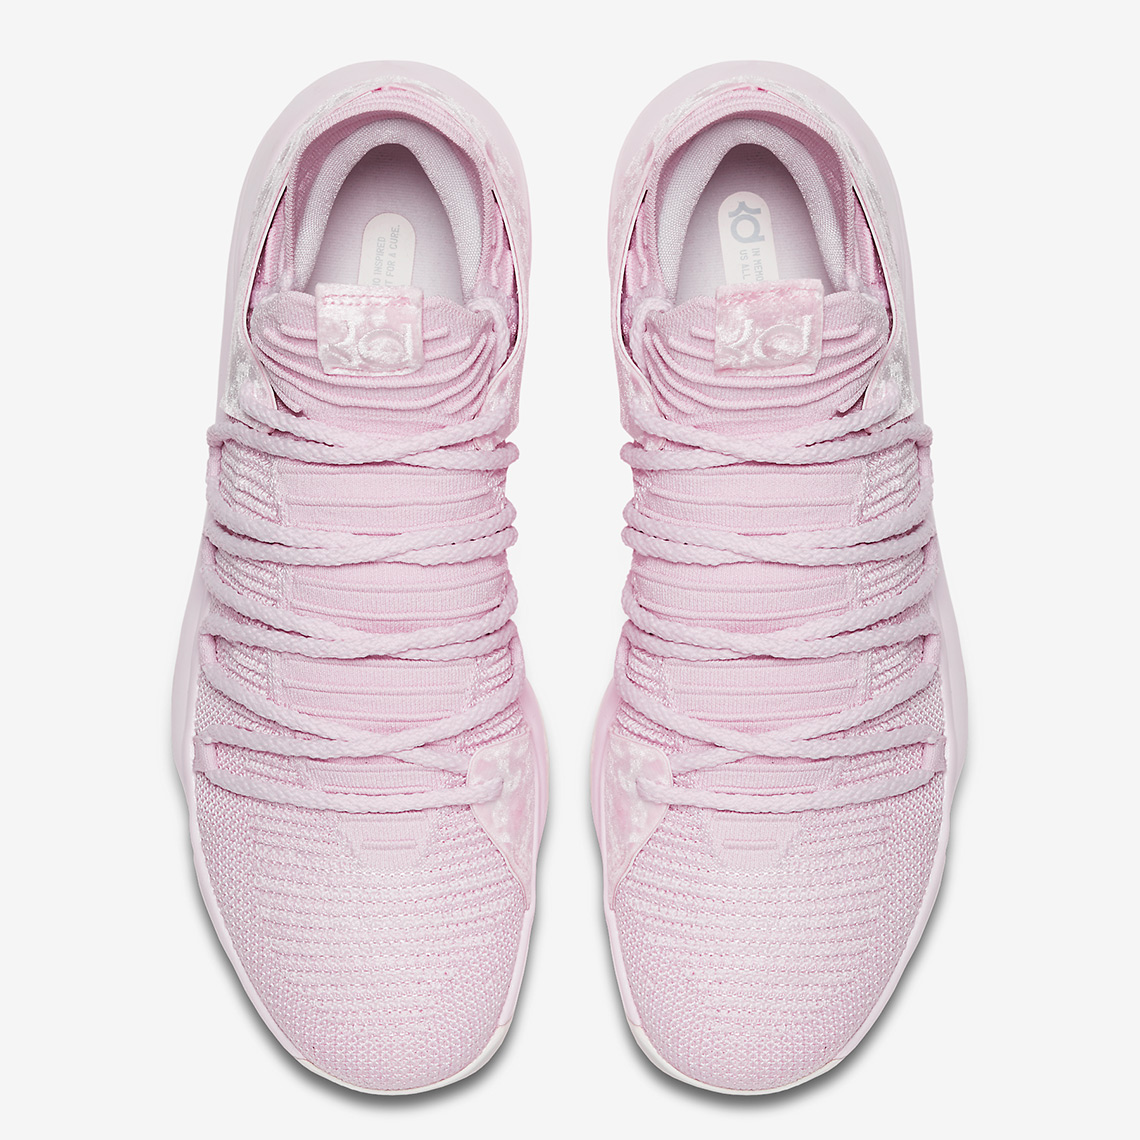 kd aunt pearl 10